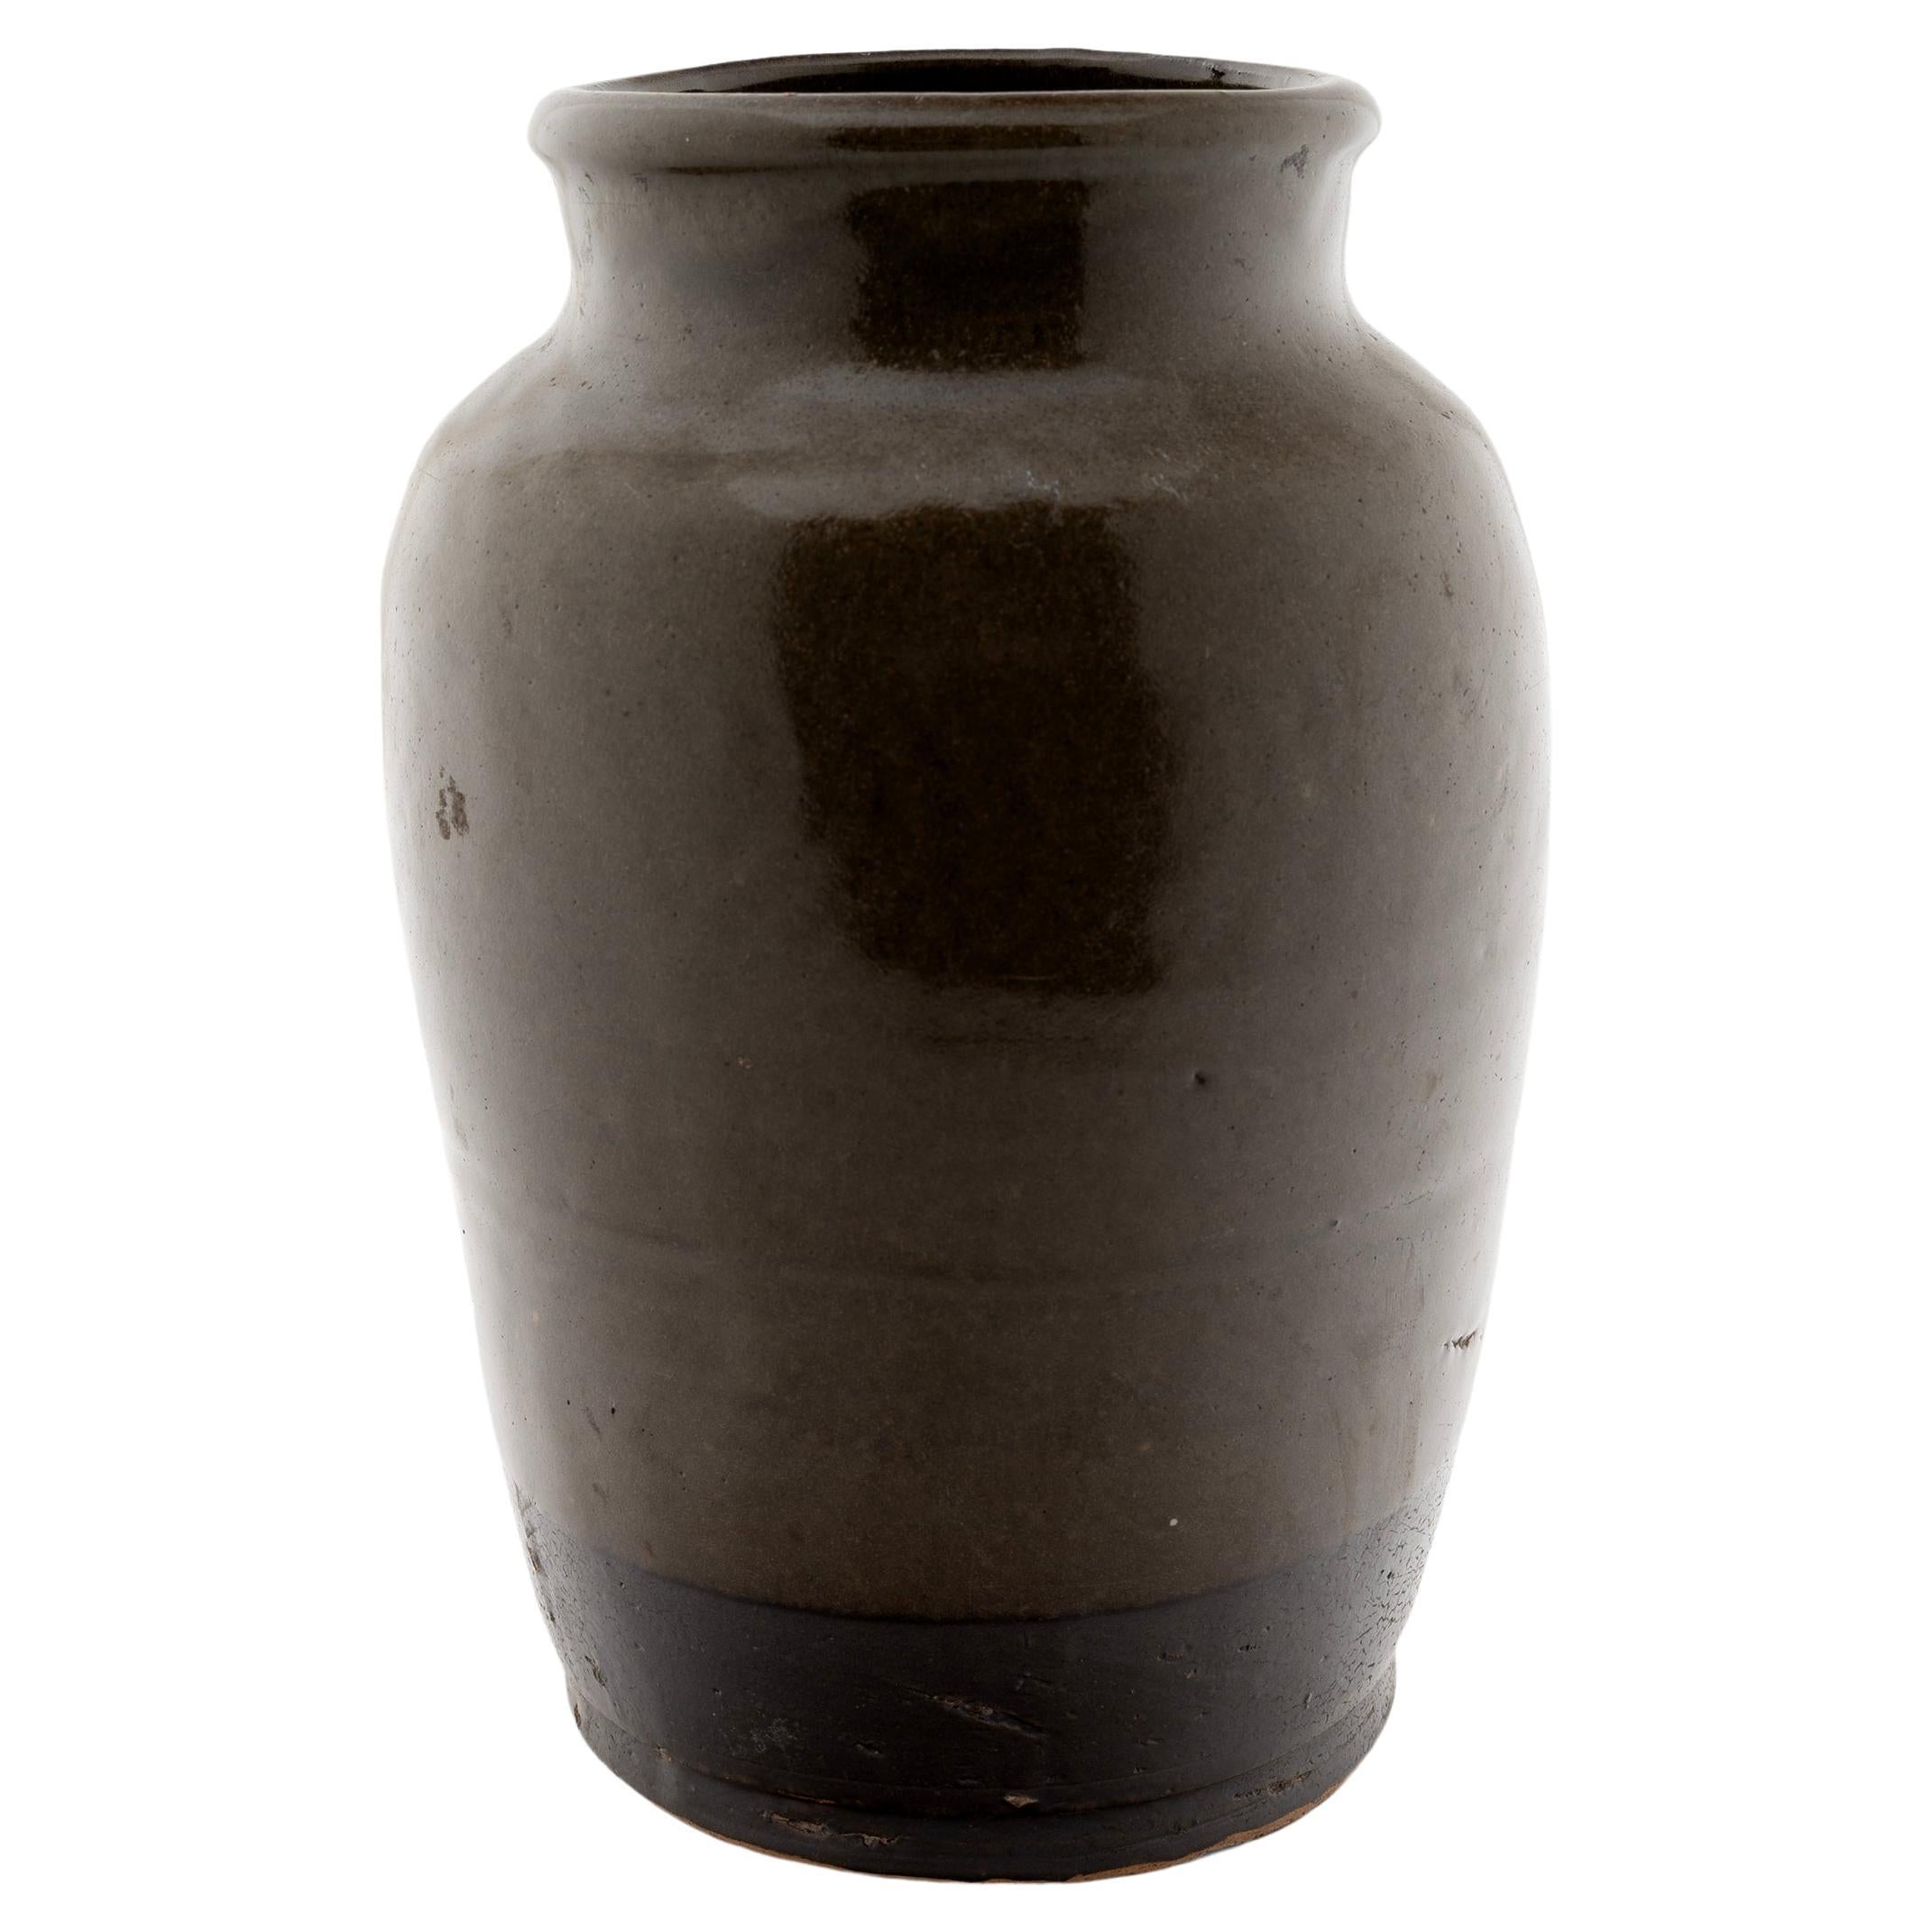 A lustrous brown glaze coats the slender tapered form of this late 19th-century kitchen jar. As evidenced by the glazed interior, the jar was once used daily in a Qing-dynasty kitchen for fermenting foods and condiments. The tapered jar features